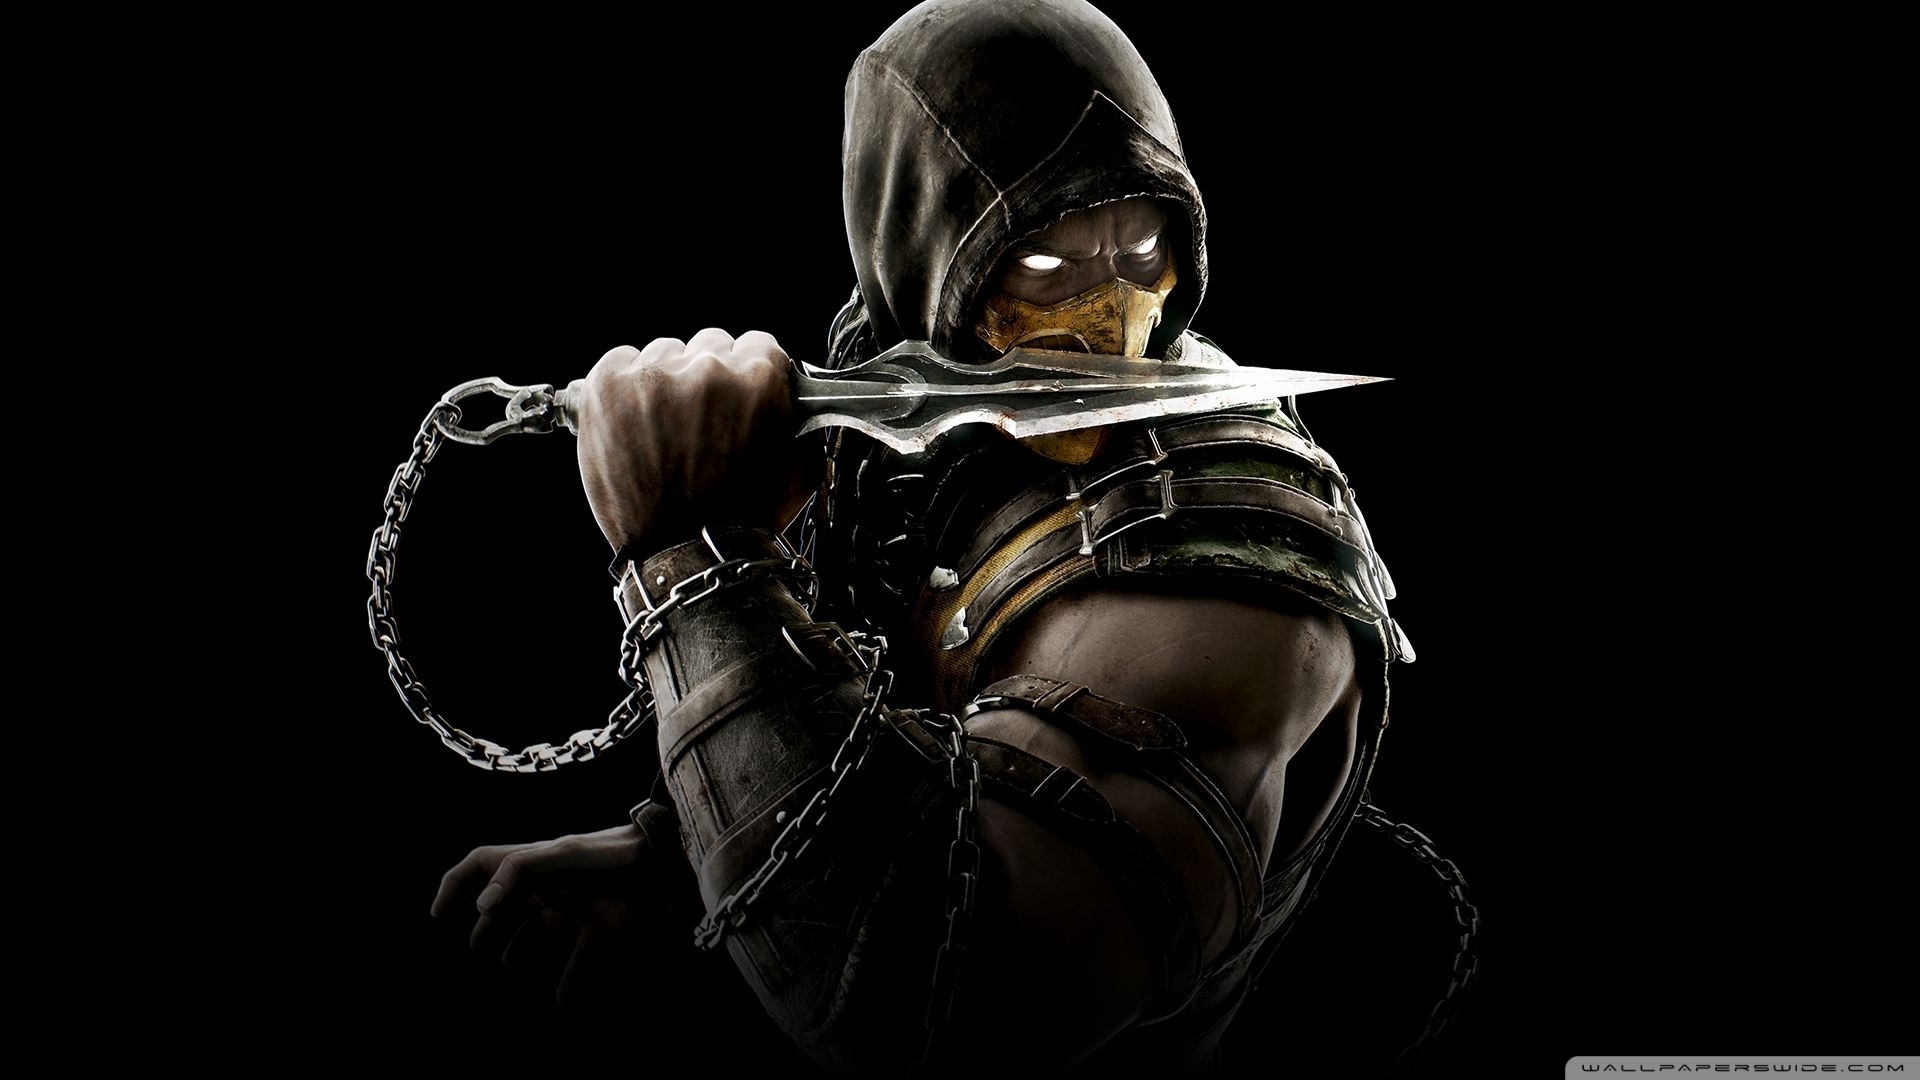 10 Best Mortal Kombat X Characters Wallpapers FULL HD 1920×1080 For PC Background